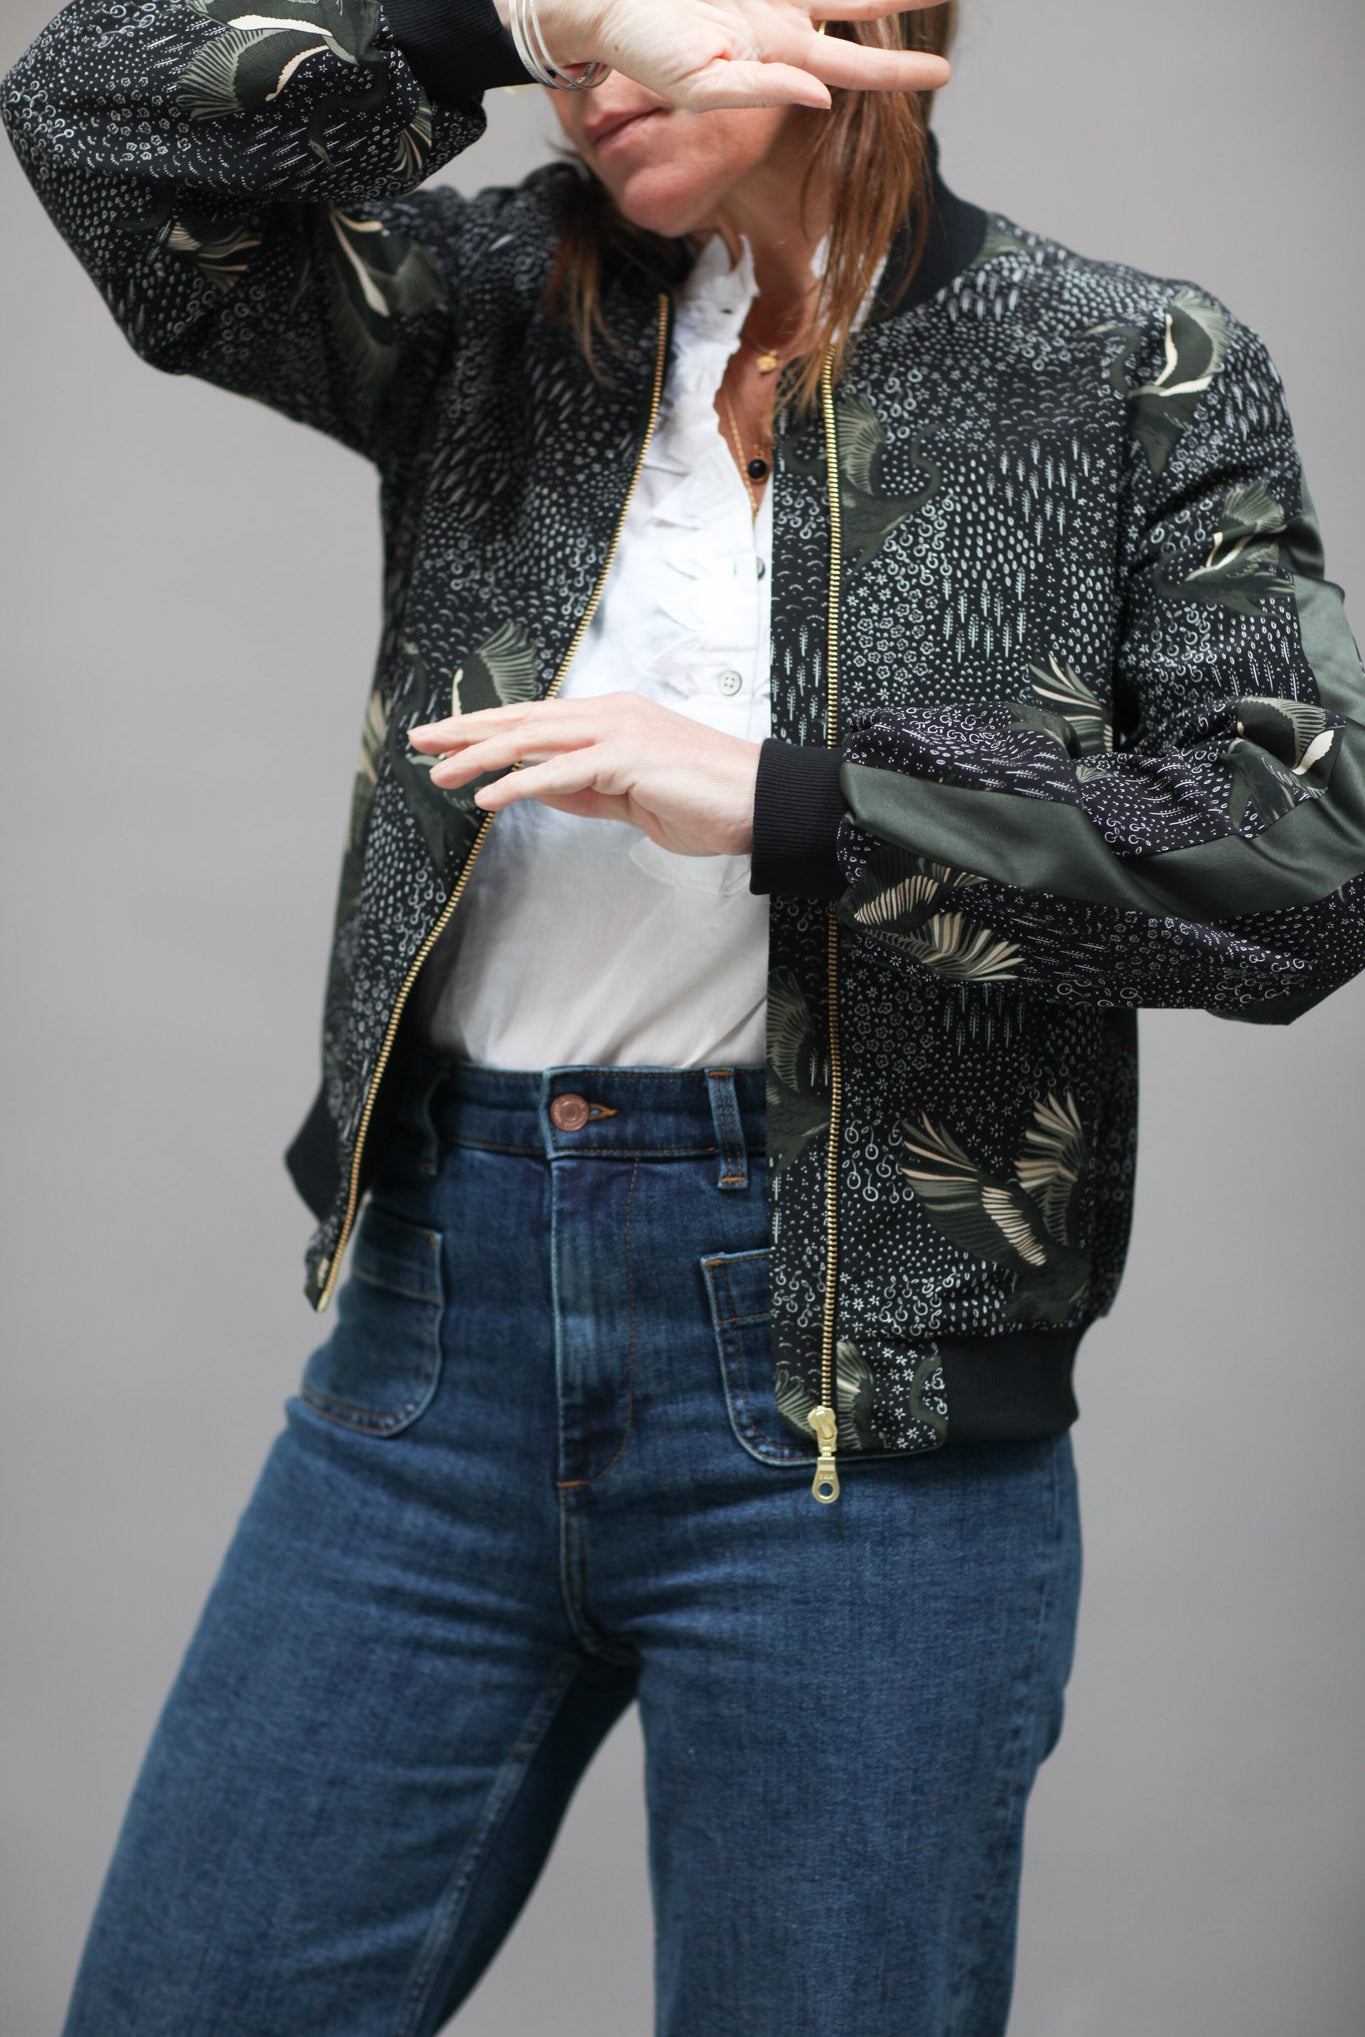 A woman wearing a printed silk bomber in green and black